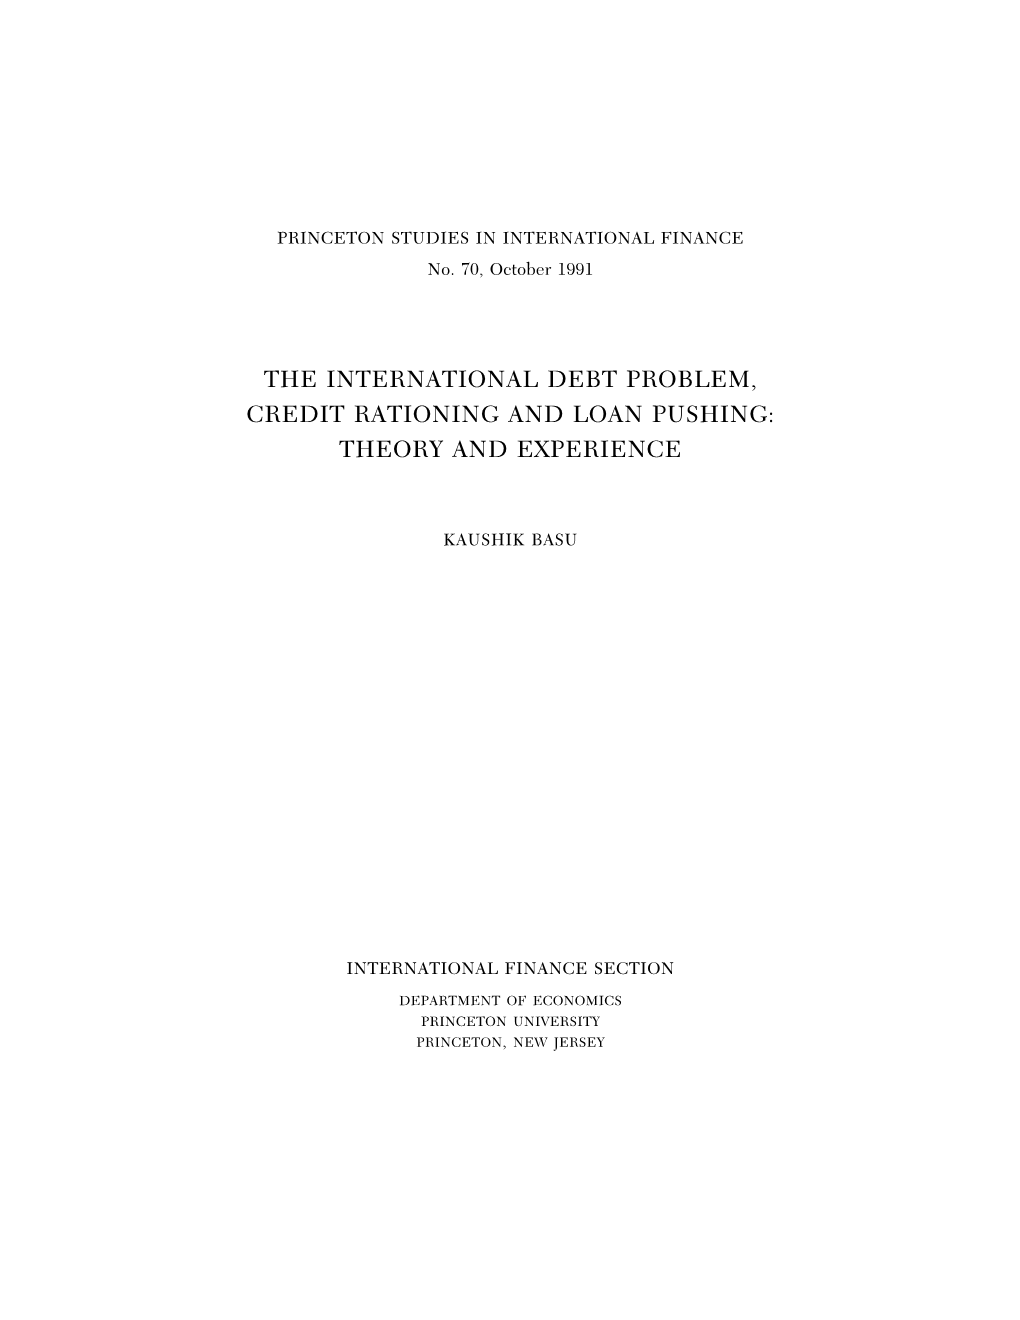 The International Debt Problem, Credit Rationing and Loan Pushing: Theory and Experience